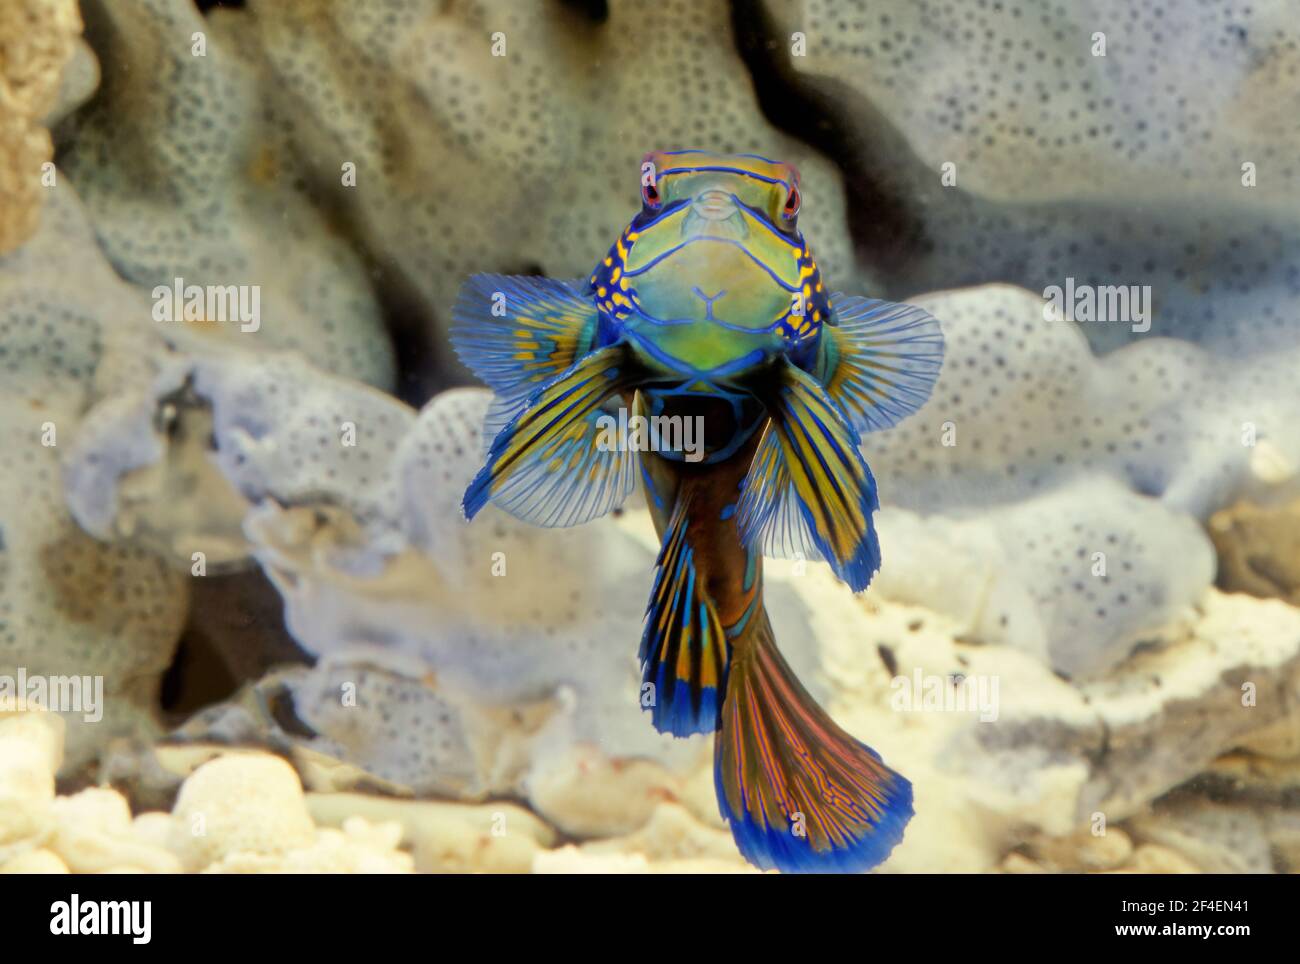 Synchiropus splendidus, the mandarinfish or mandarin dragonet, is a small, brightly colored member of the dragonet family Stock Photo